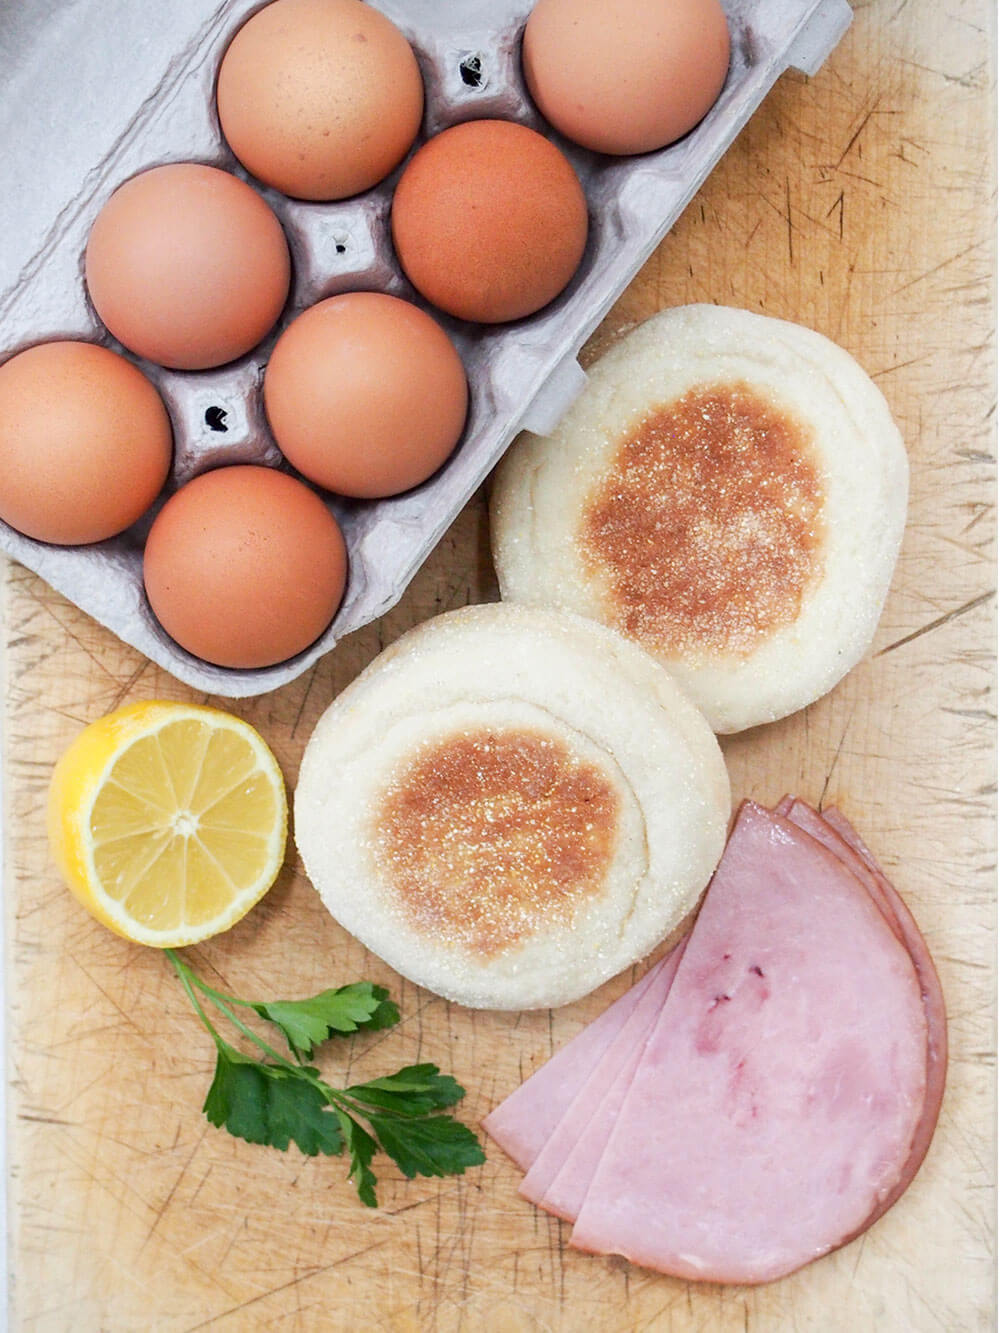 eggs, muffins, ham, lemon and a little parsley laid out on cutting board